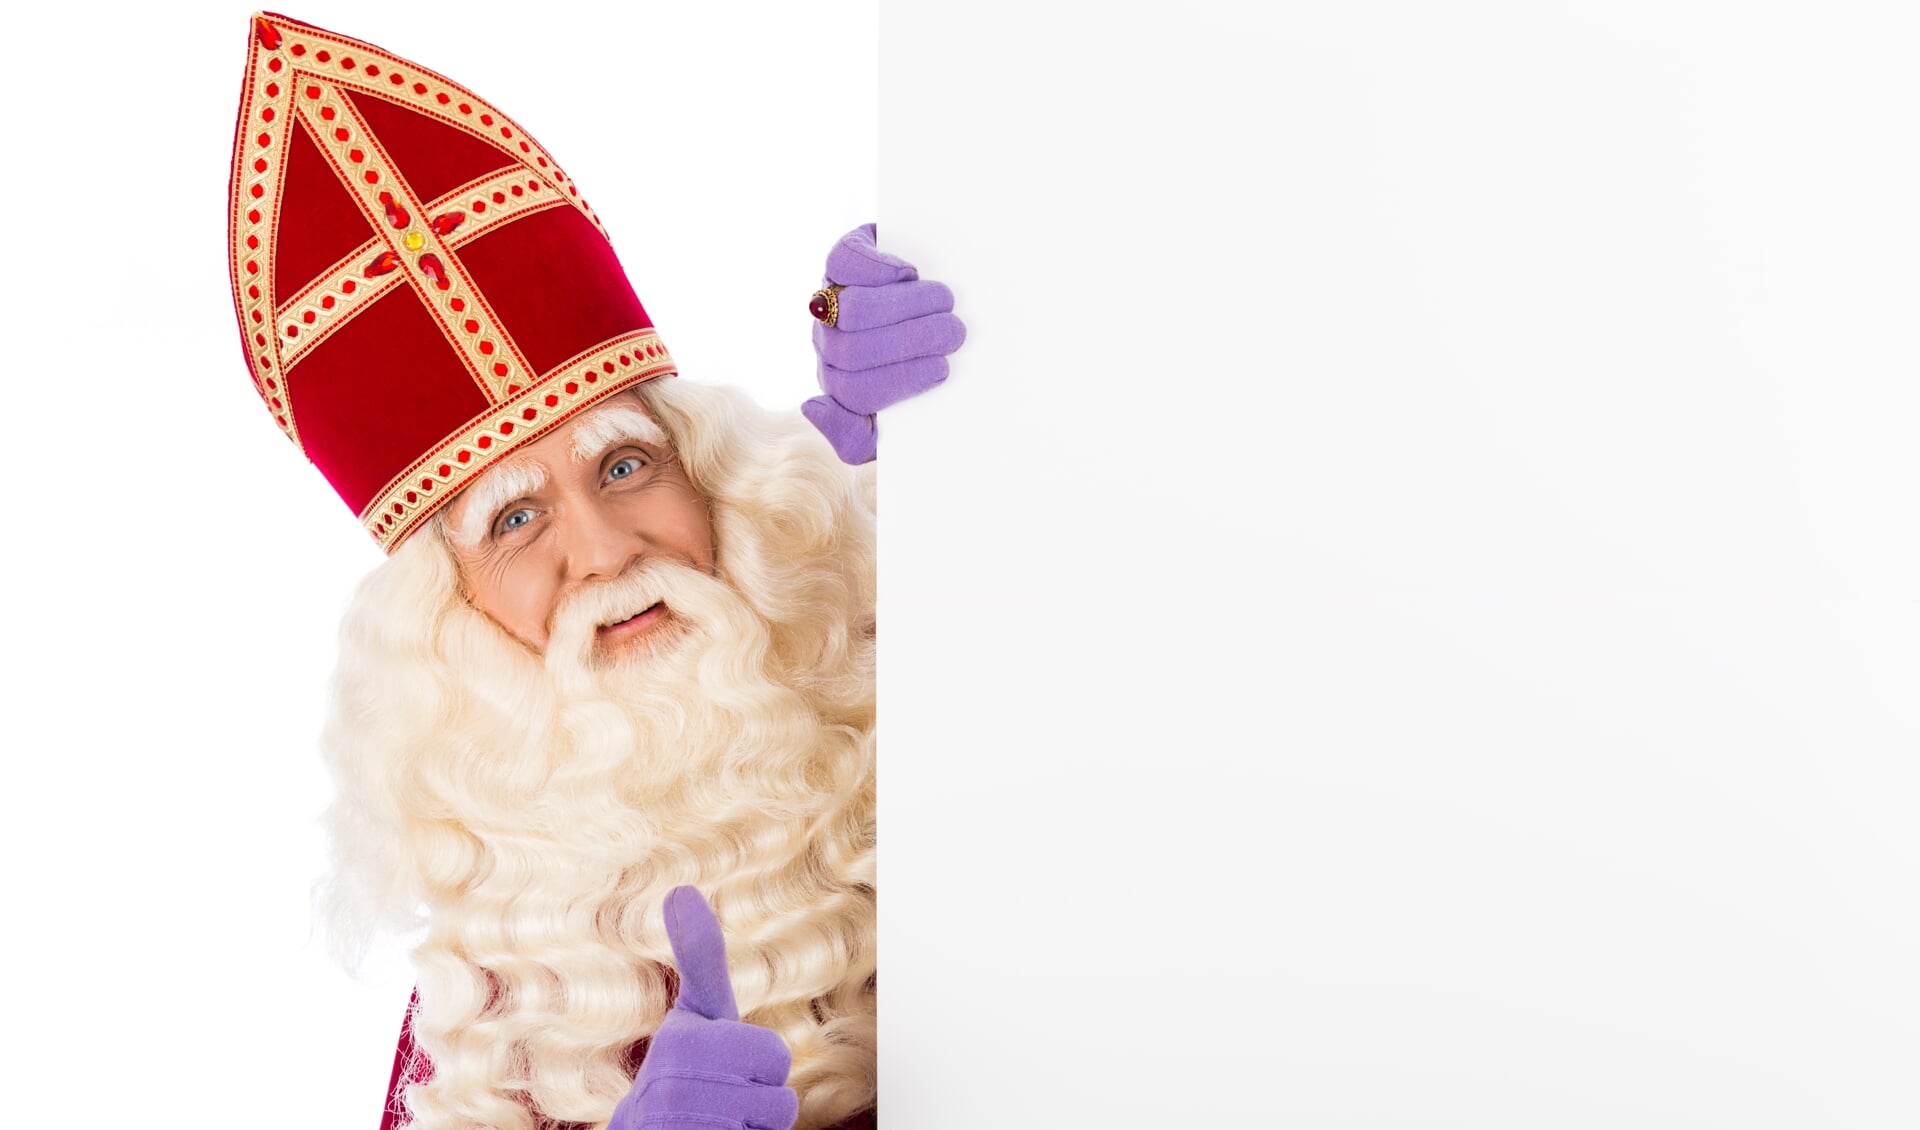 Sinterklaas with whiteboard. isolated on white background. Dutch character of Santa Claus